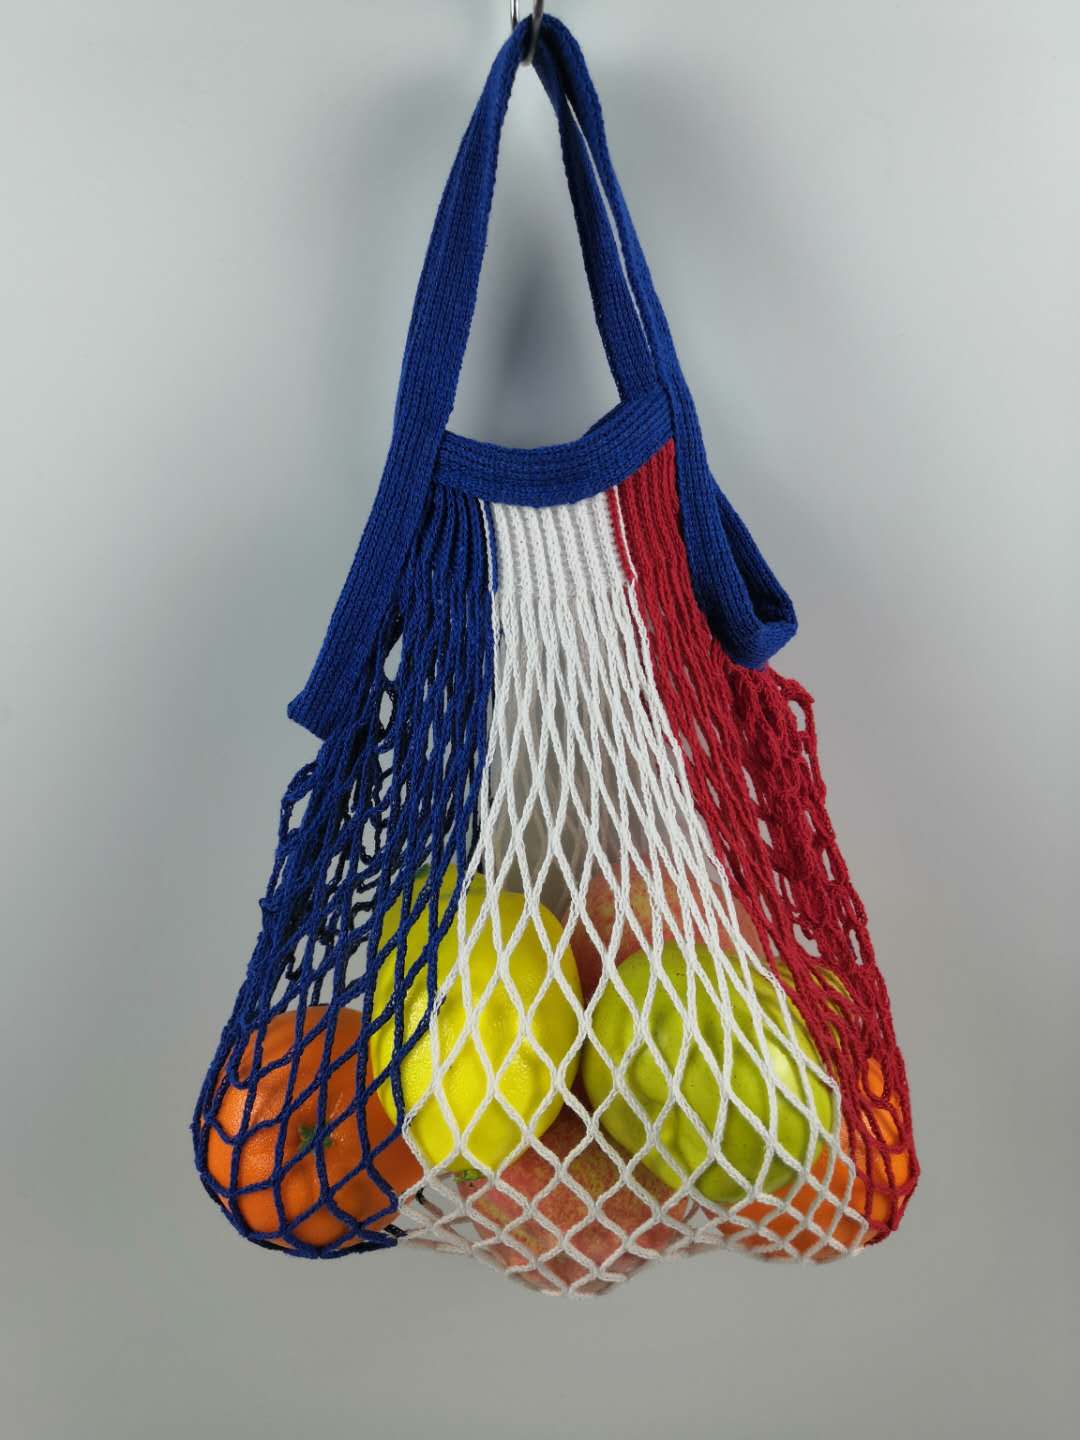 French new style net bag